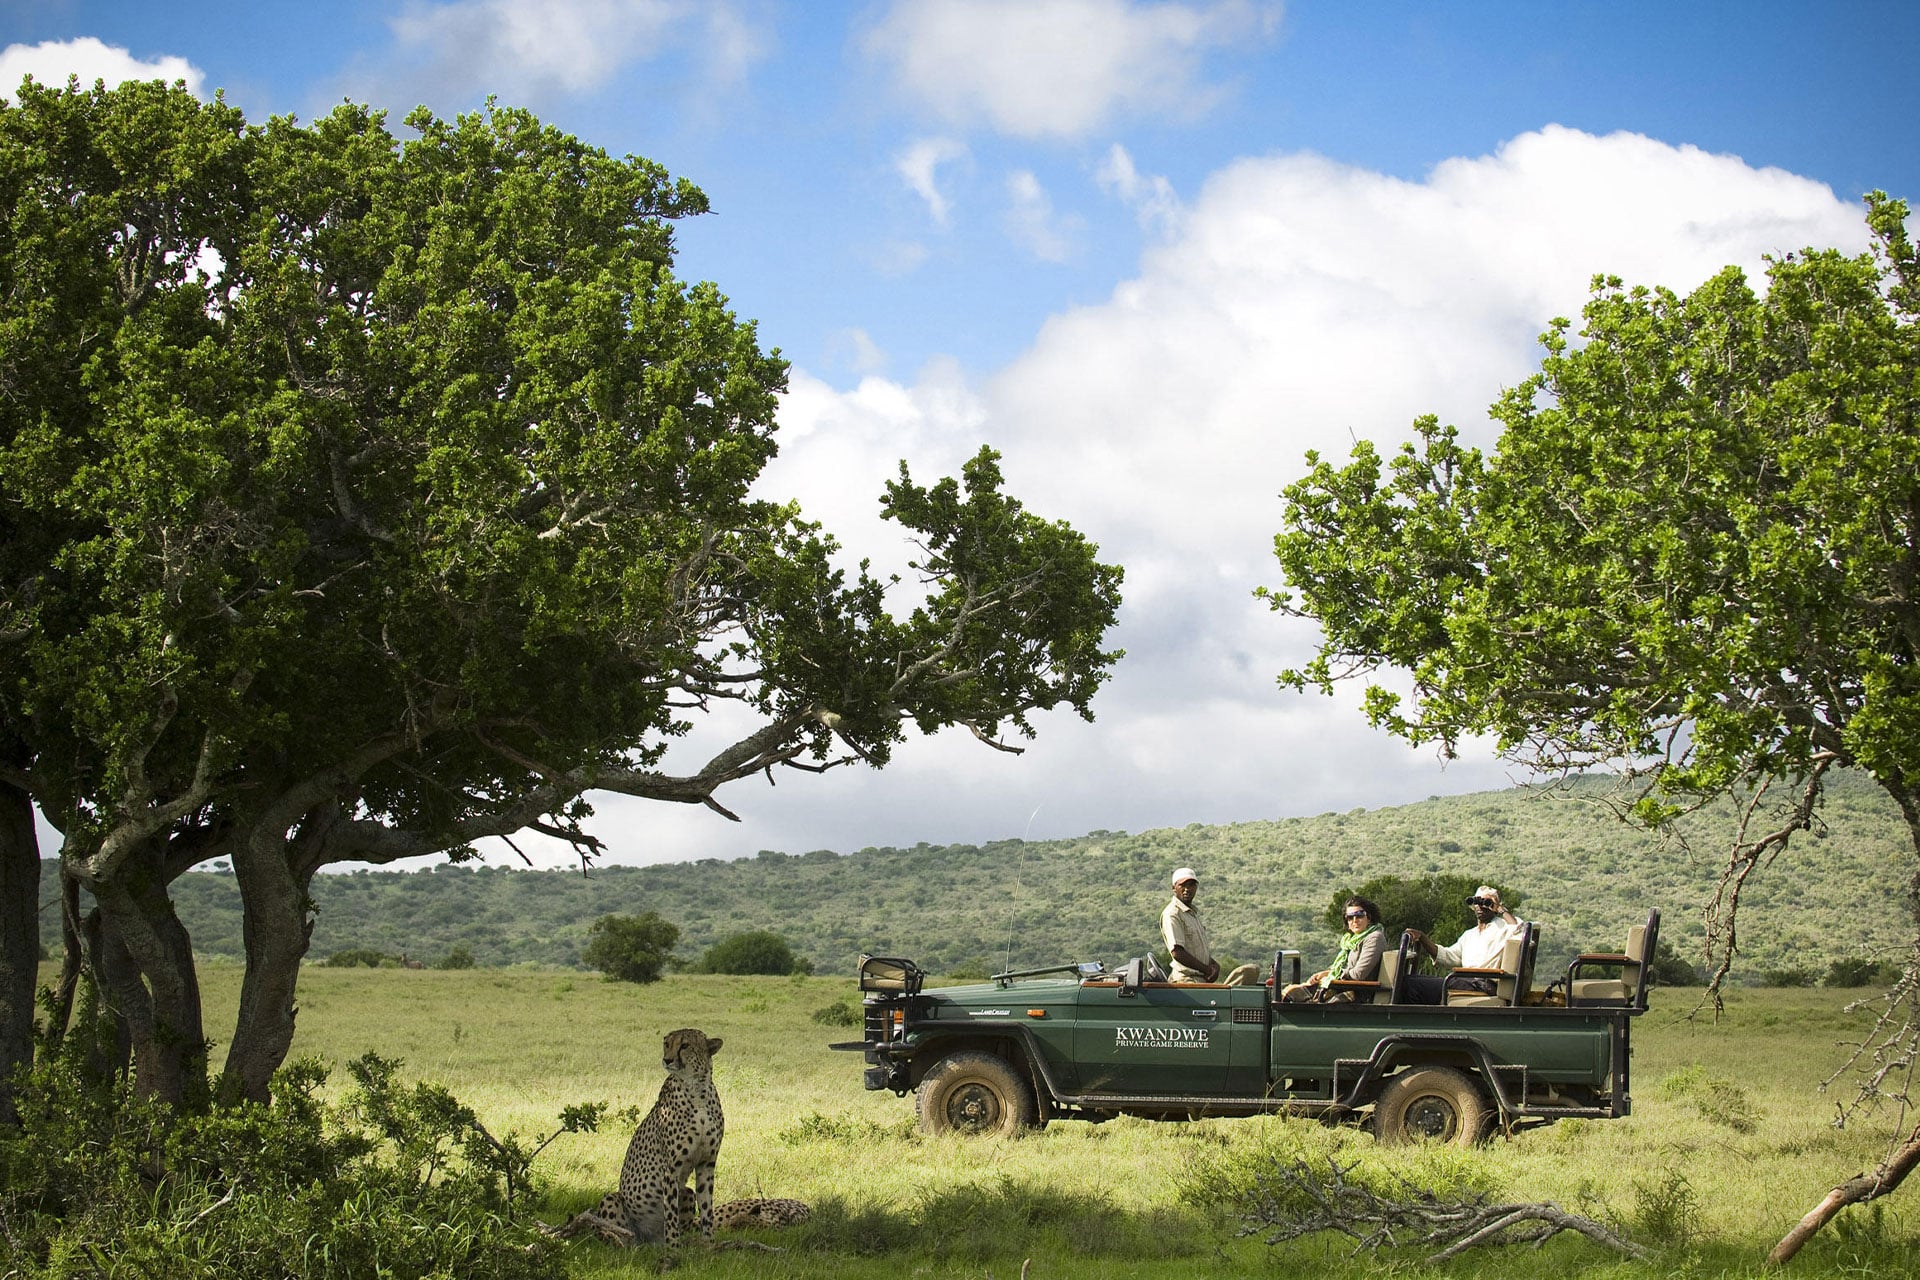 Two cheetahs under a tree and a game drive vehicle on a safari in Kwandwe Private Game Reserve.